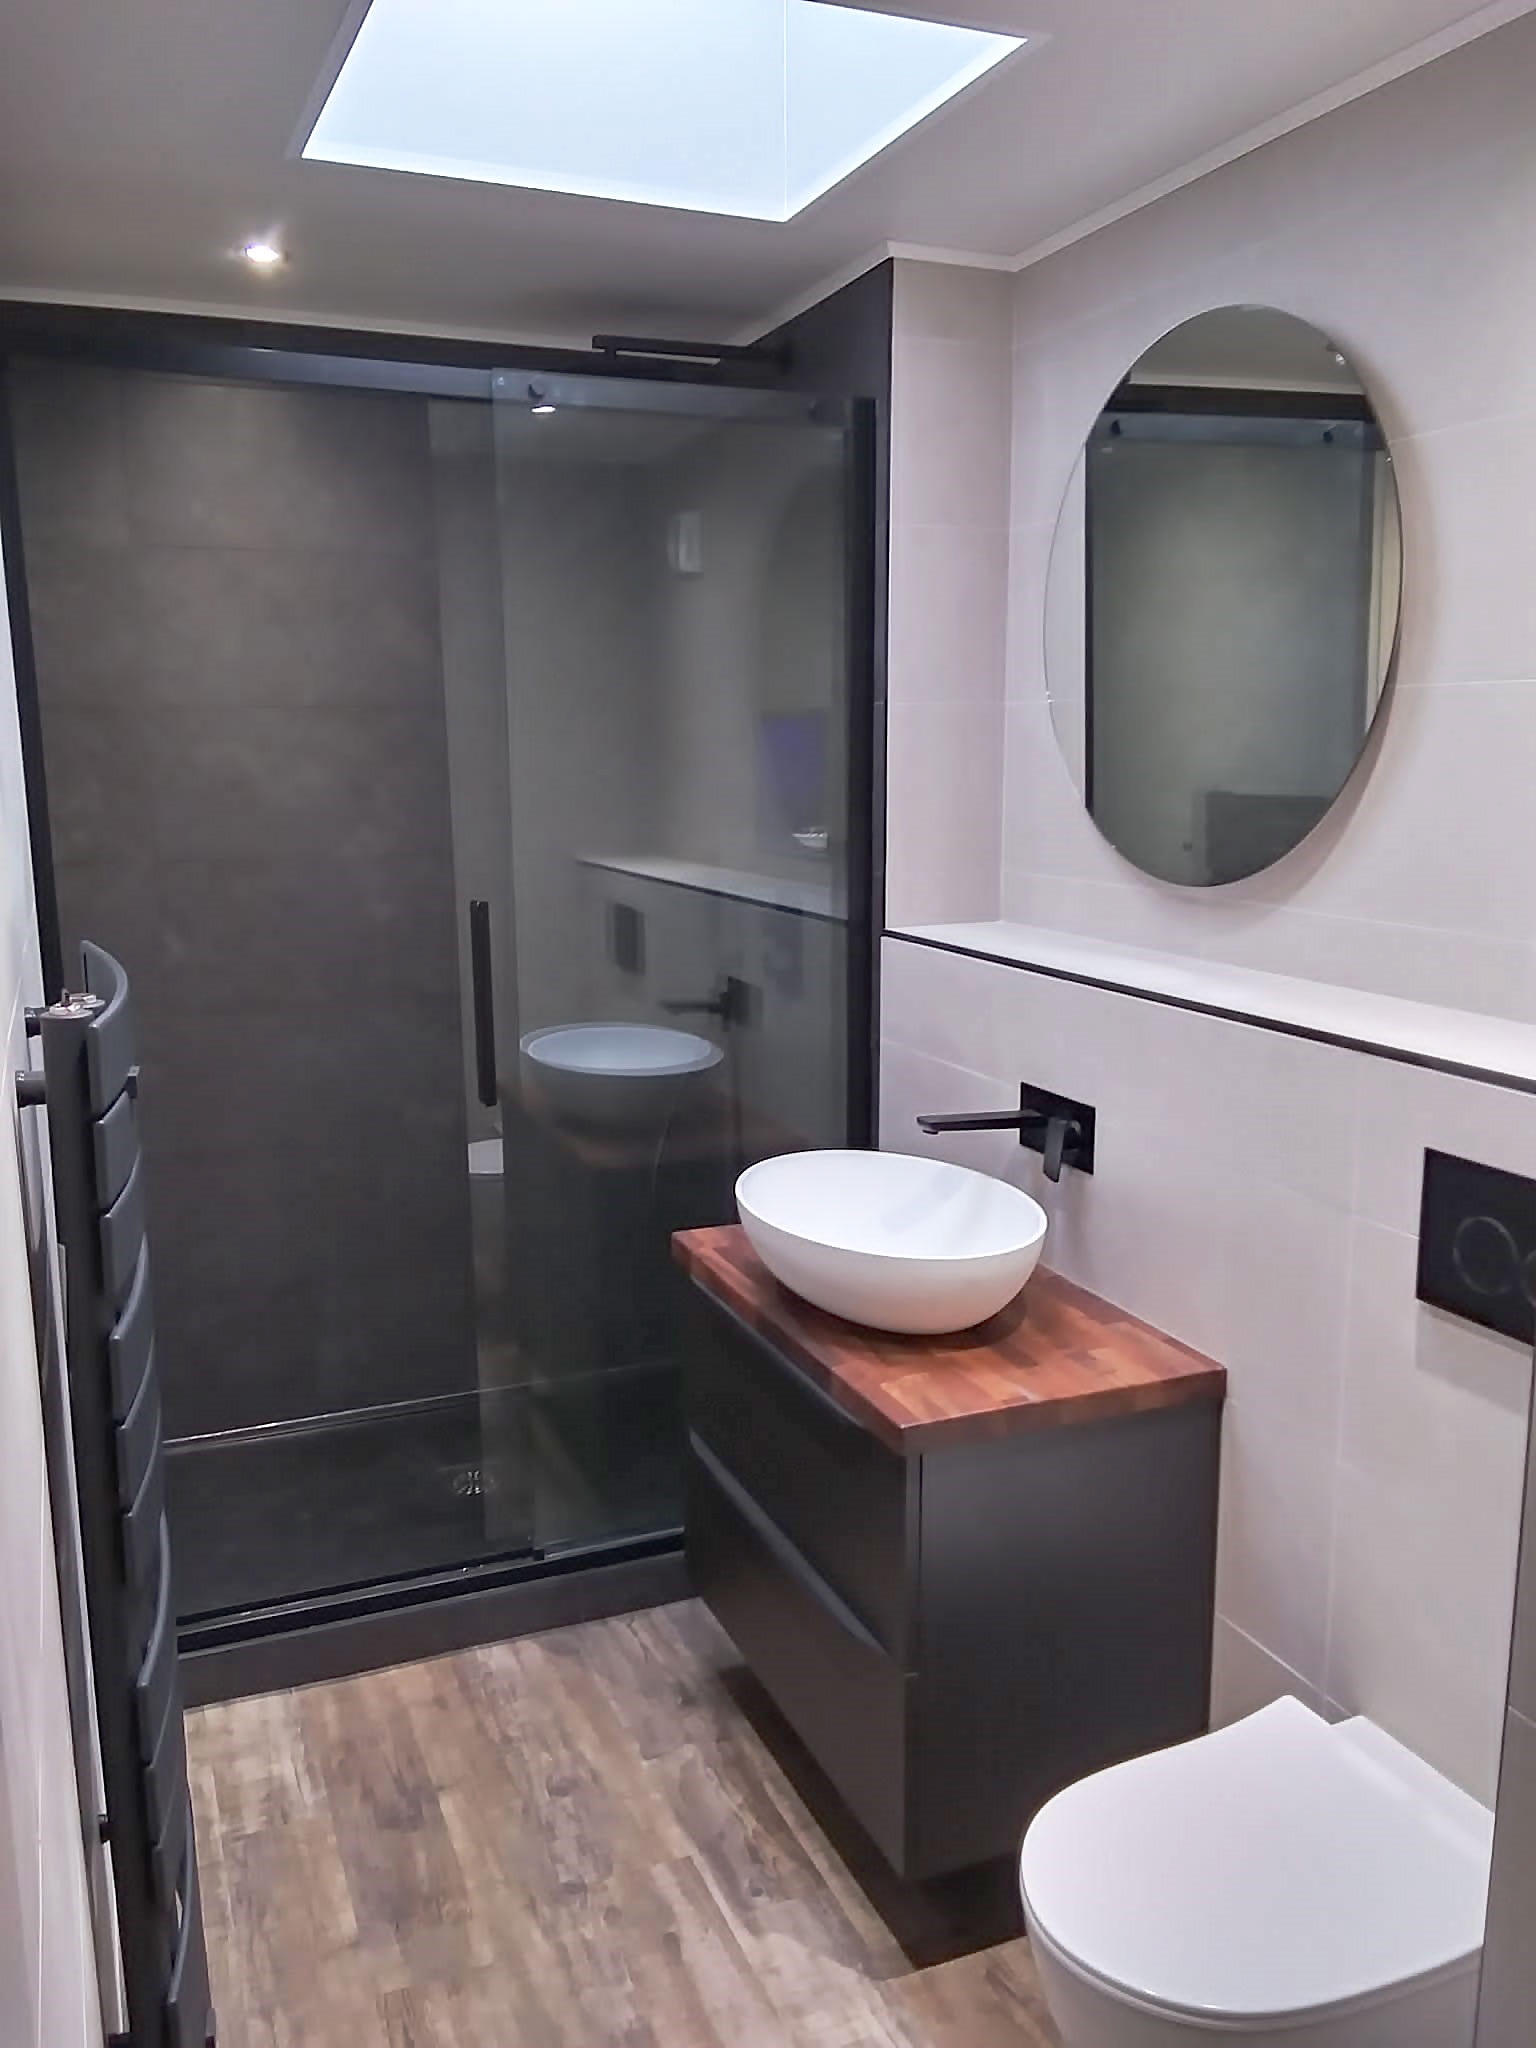 Fitted Bathrooms Nottingham | Independent Bathroom Fitters & Designers